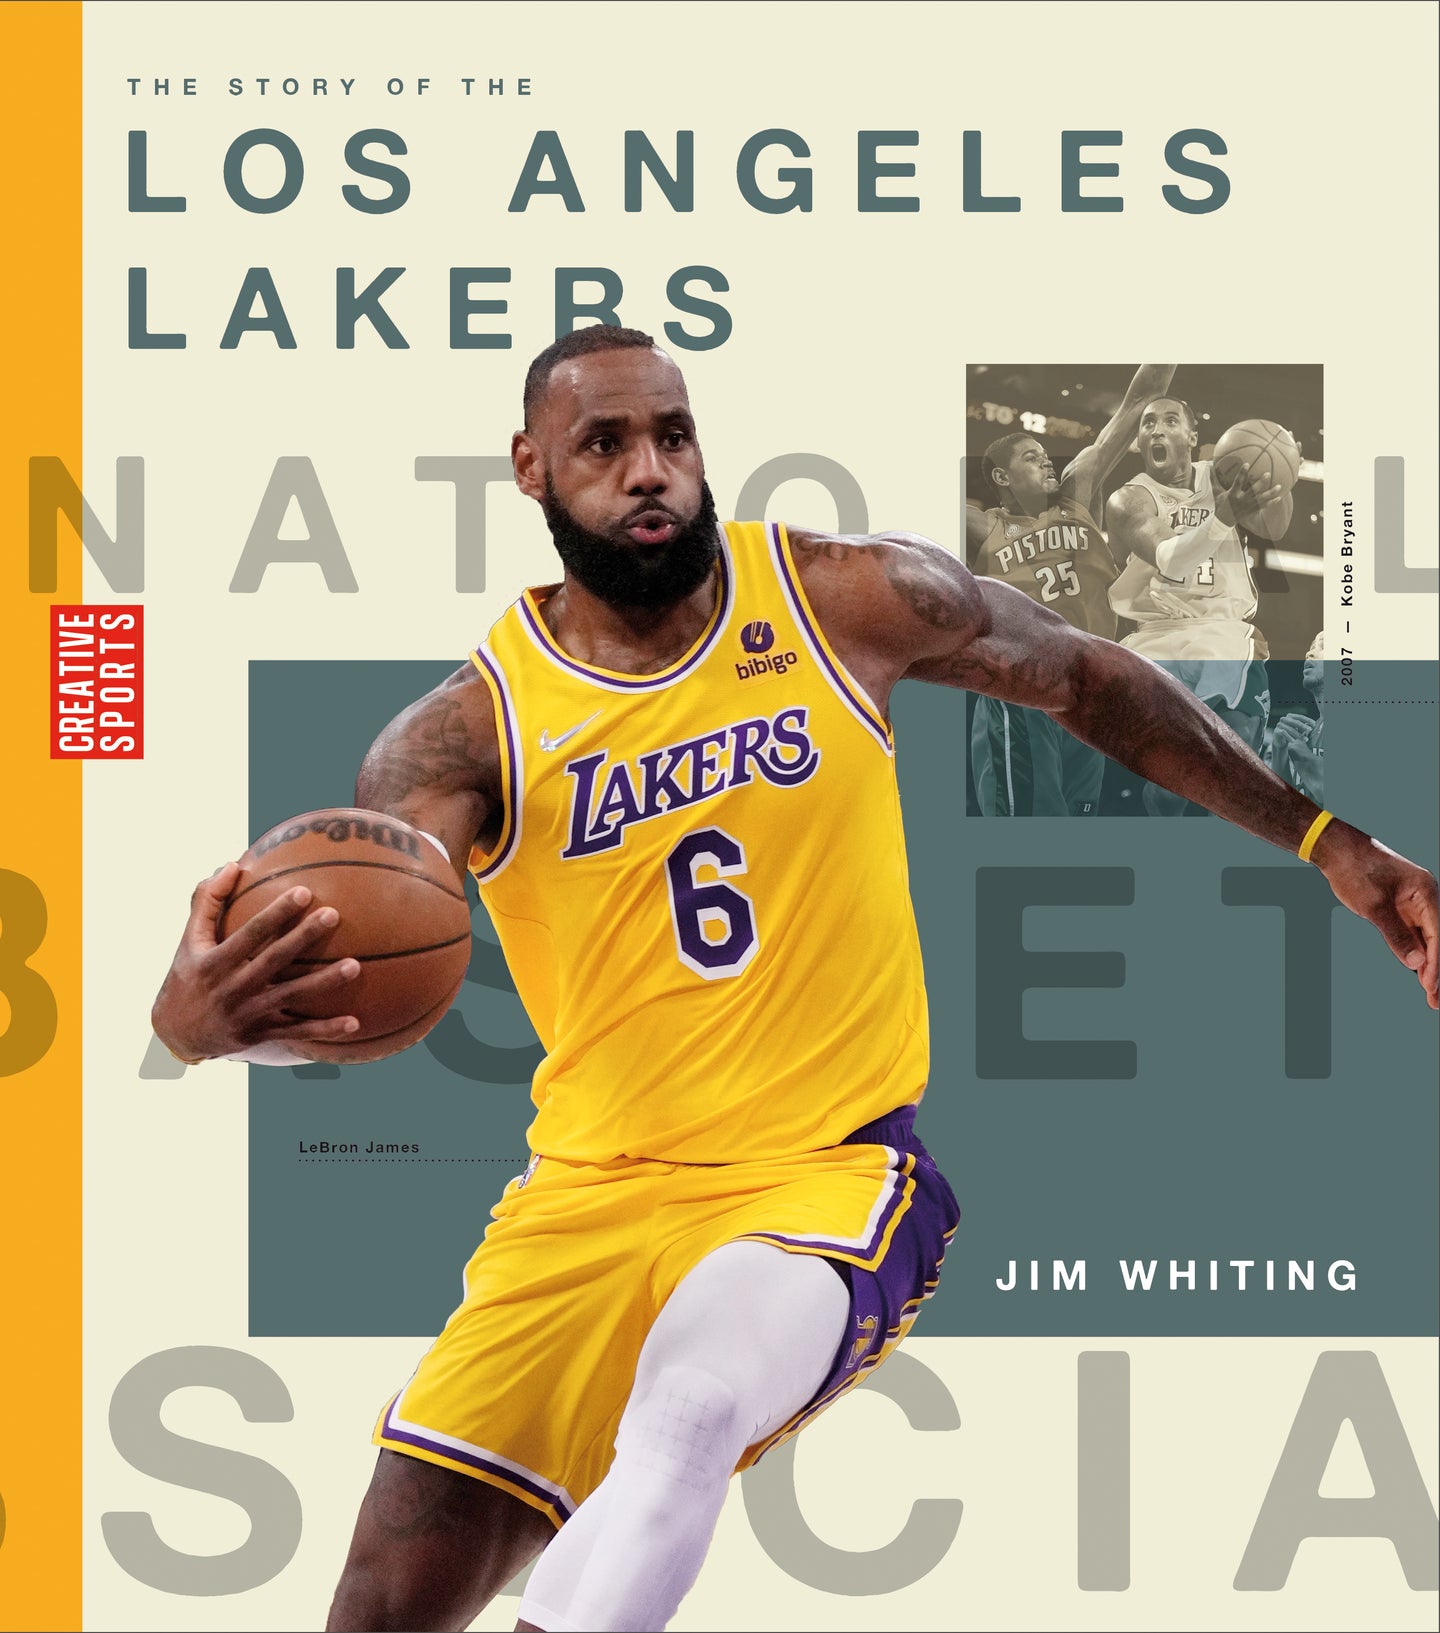 A History of Hoops (2023): The Story of the Los Angeles Lakers